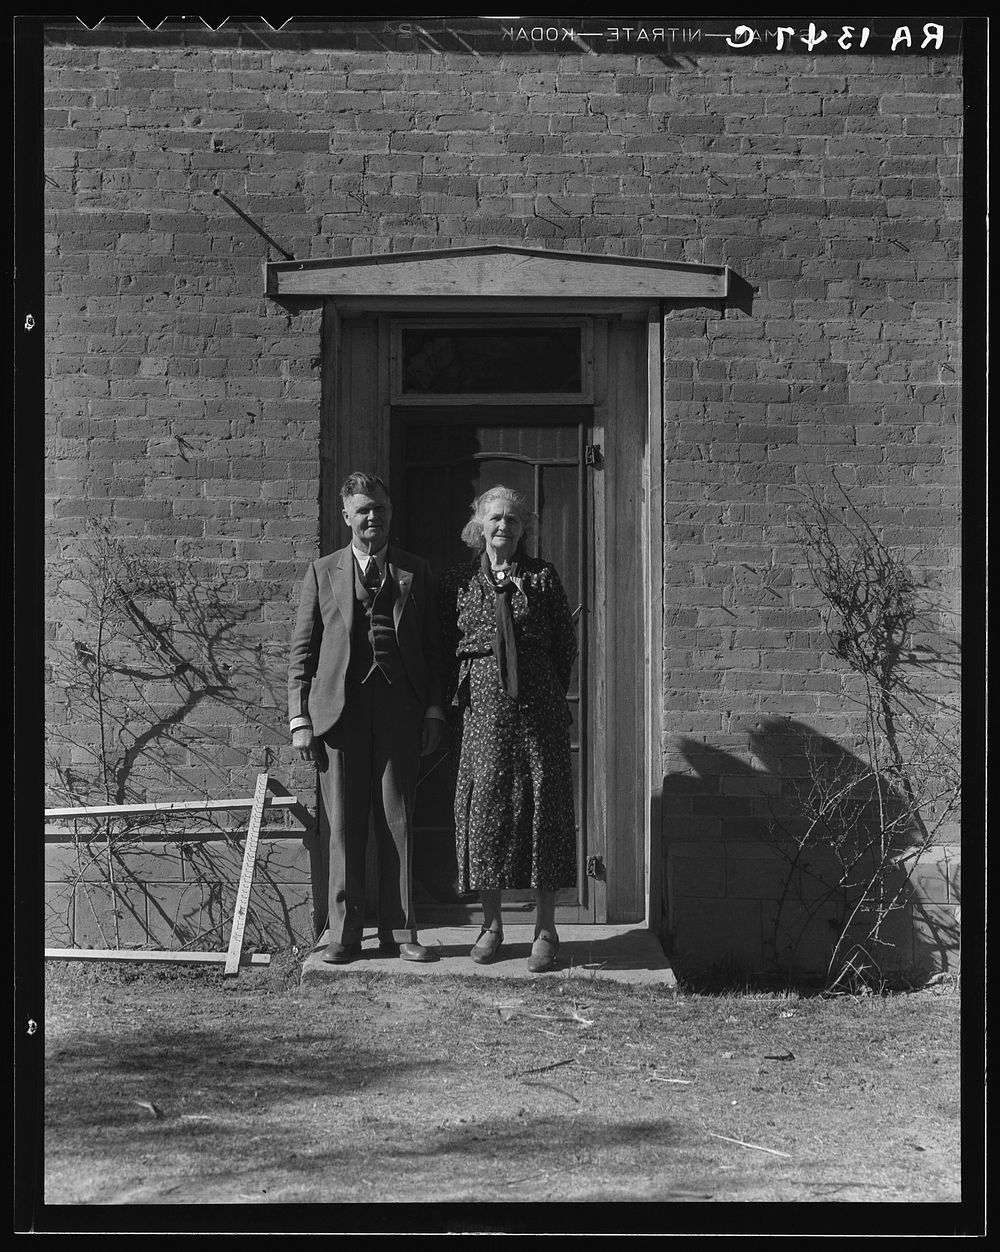 Escalante people. Utah. Sourced from the Library of Congress.